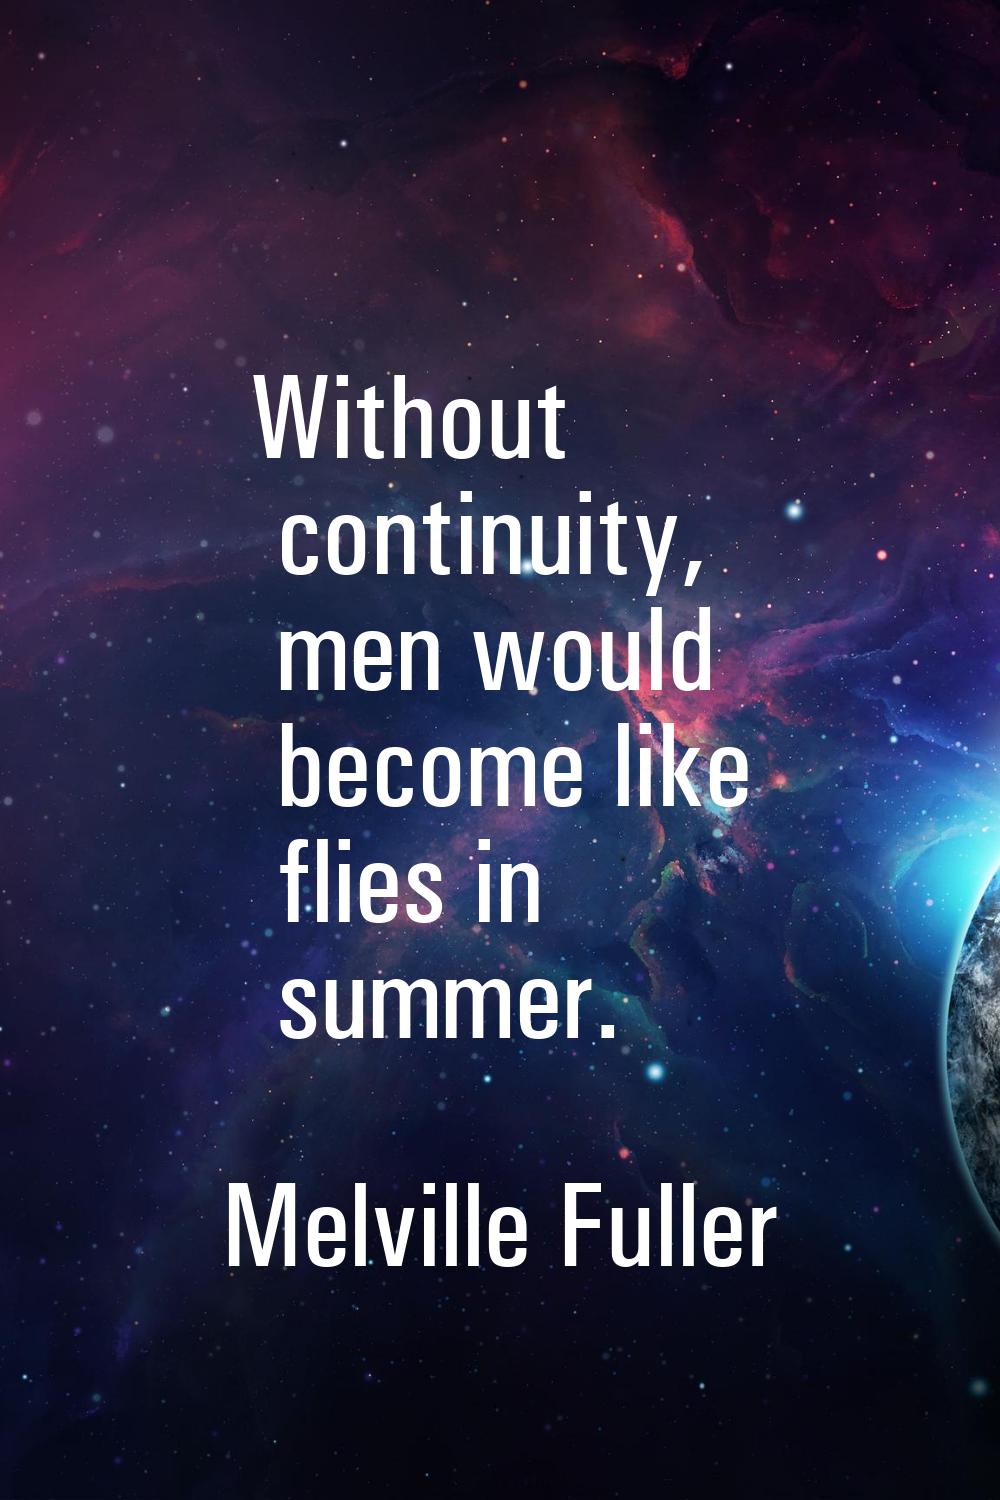 Without continuity, men would become like flies in summer.